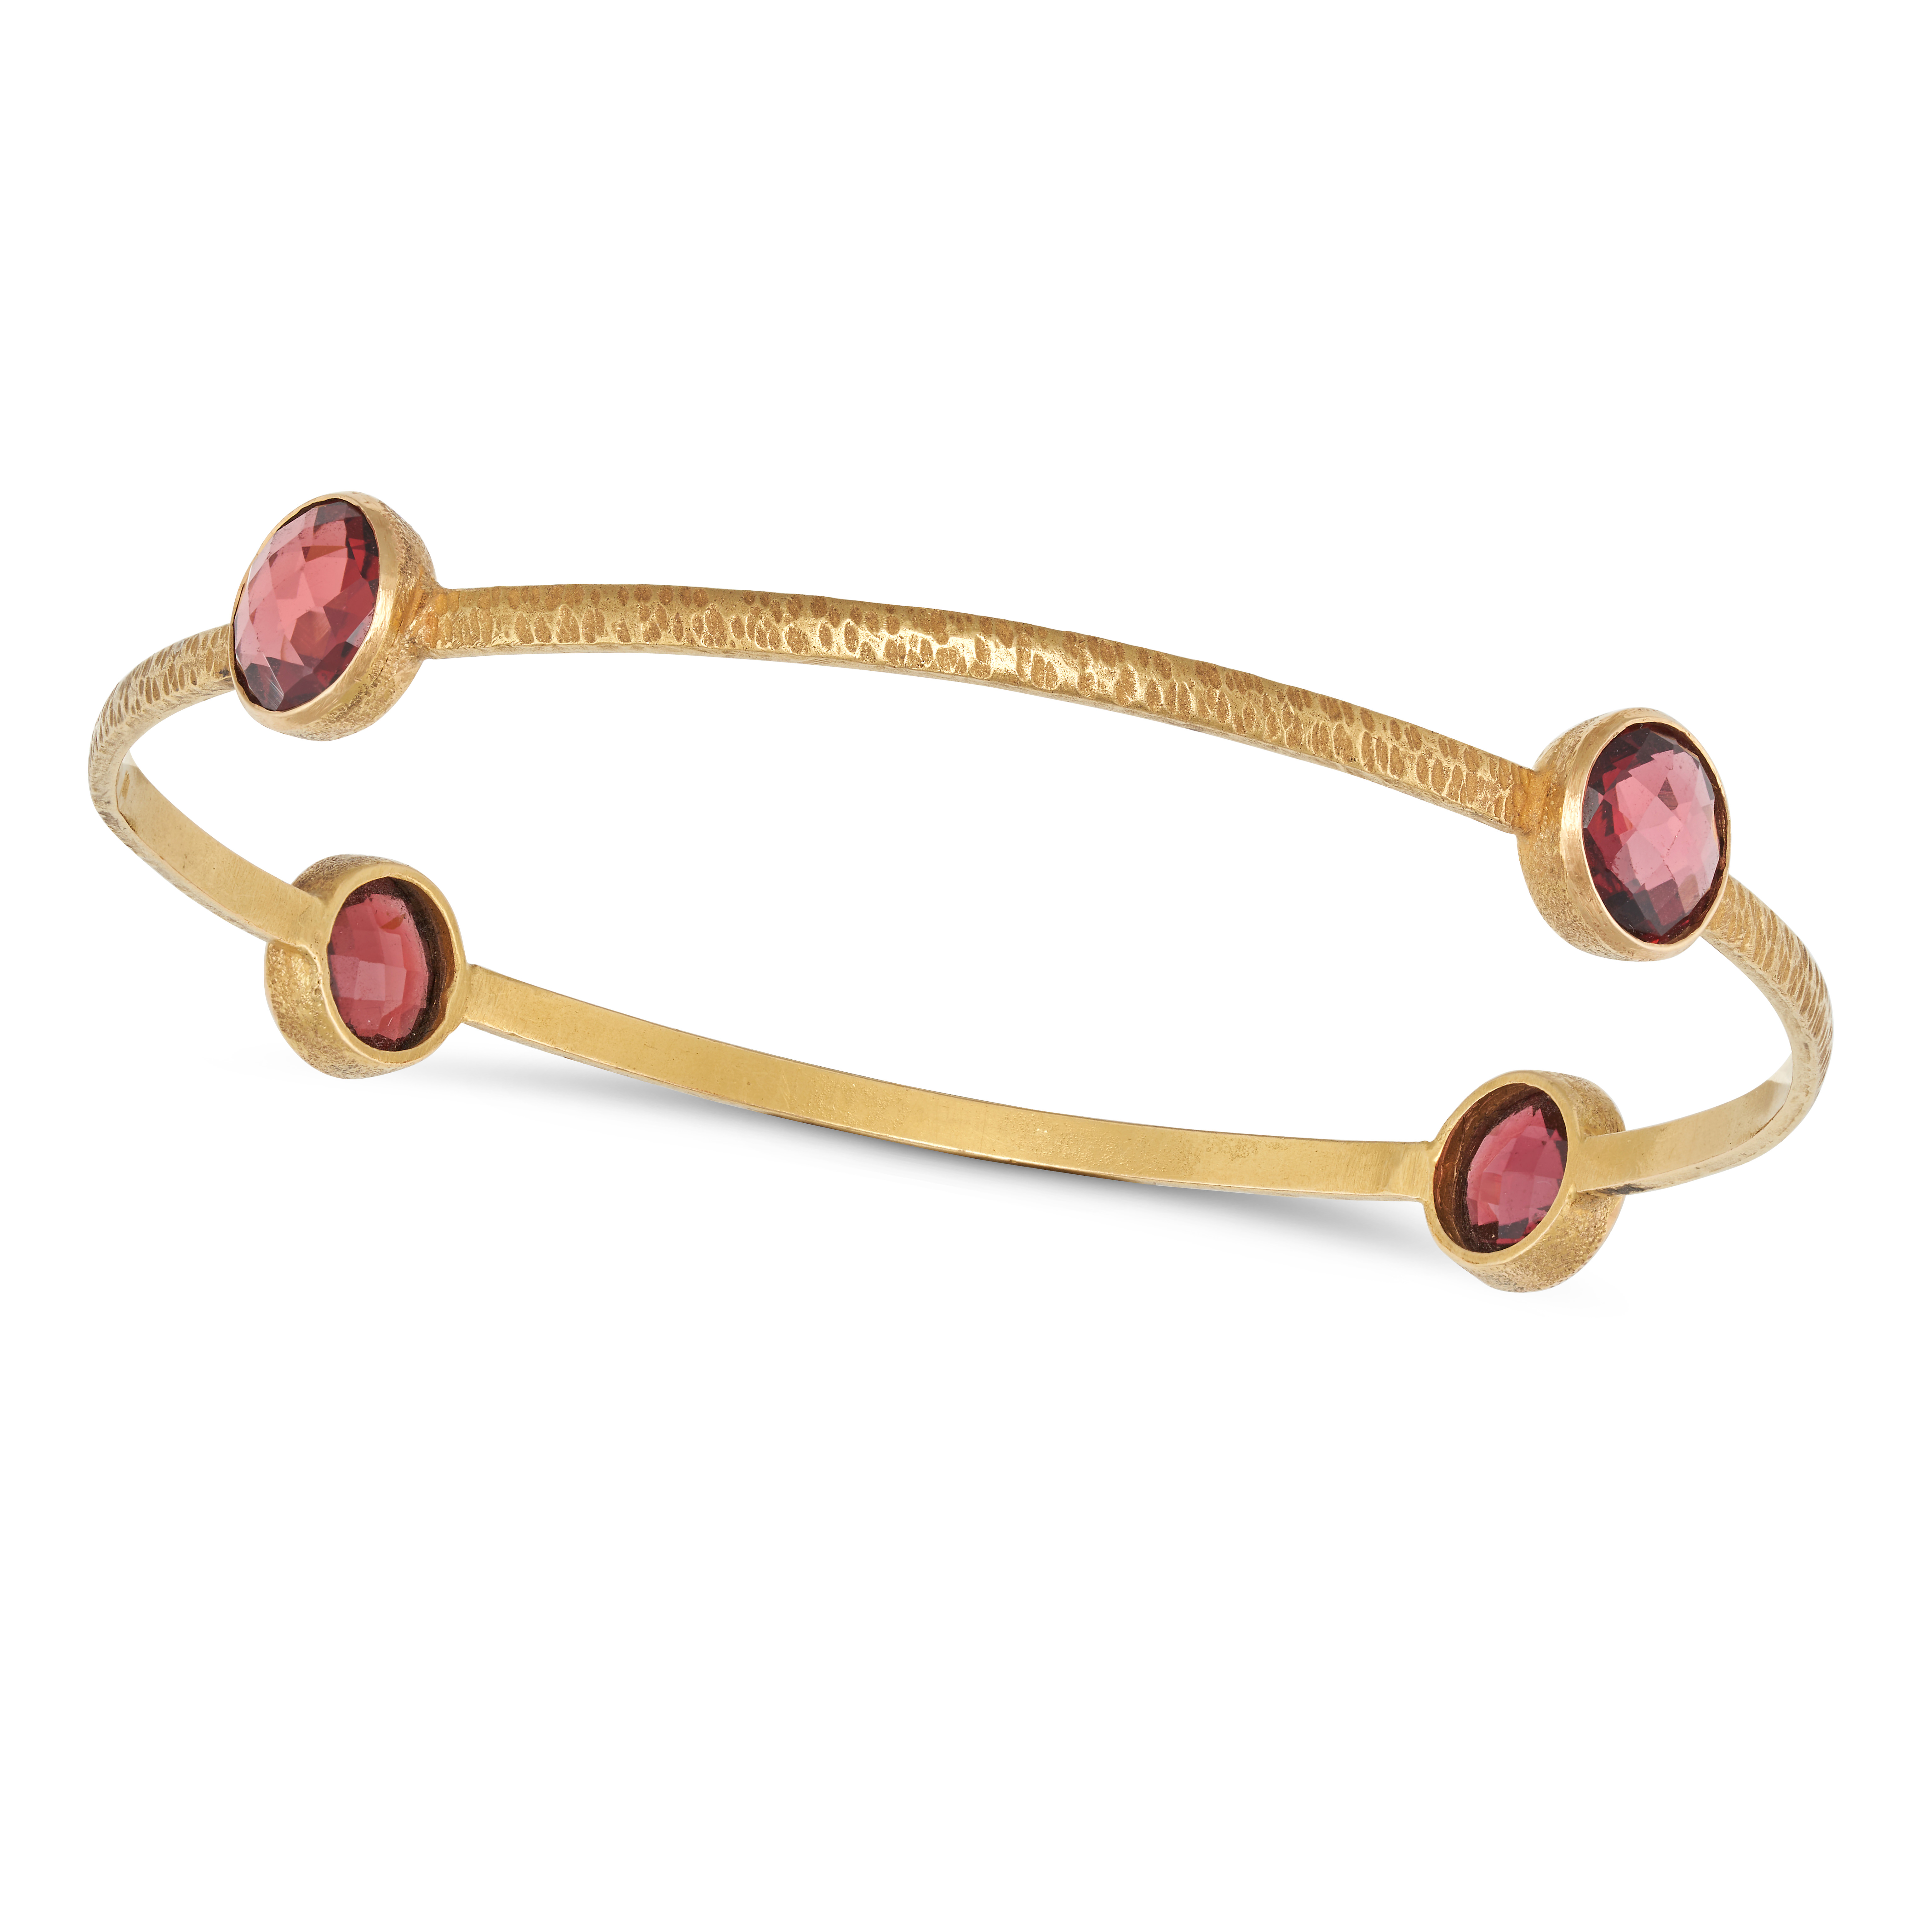 A PINK TOURMALINE BANGLE in 18ct yellow gold, the hammered gold bangle set with four fancy cut pi...